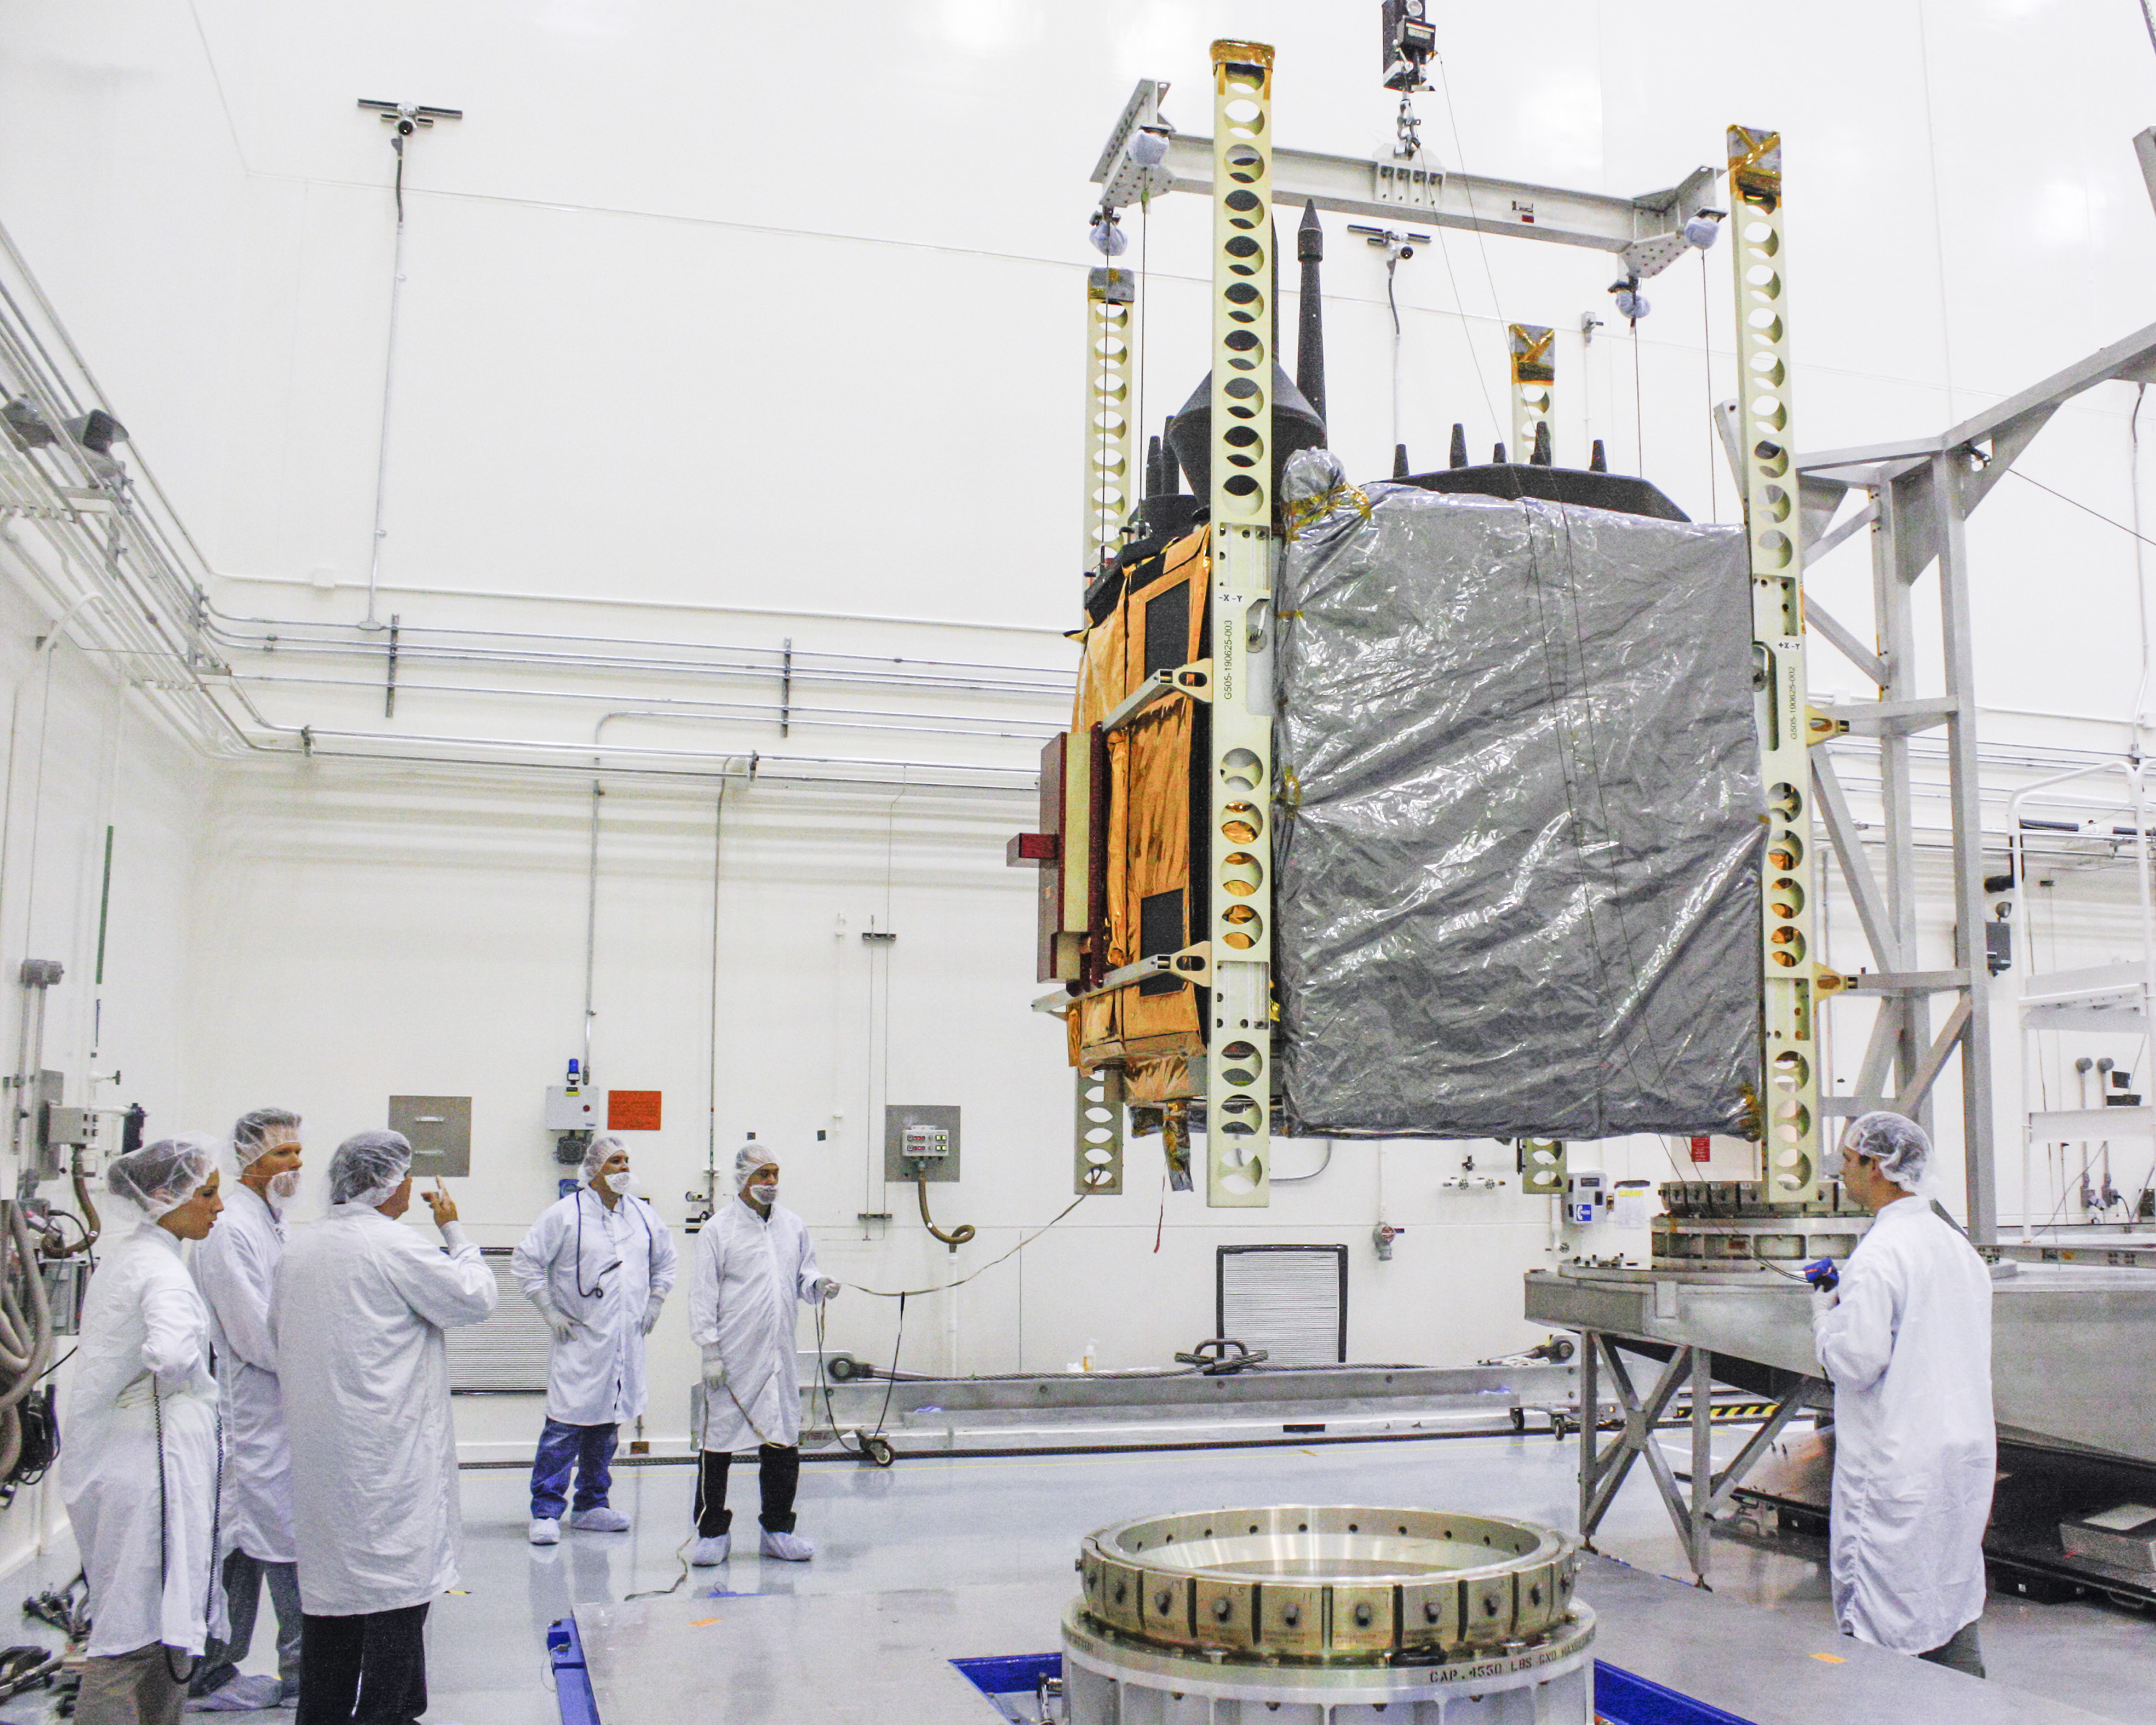 The Global Positioning System (GPS) IIF-5 is moved onto a transporter on 17 September 2013, whilst in clean room conditions at the Navstar Processing Facility at Cape Canaveral Air Force Station, Fla. Photo Credit: Boeing